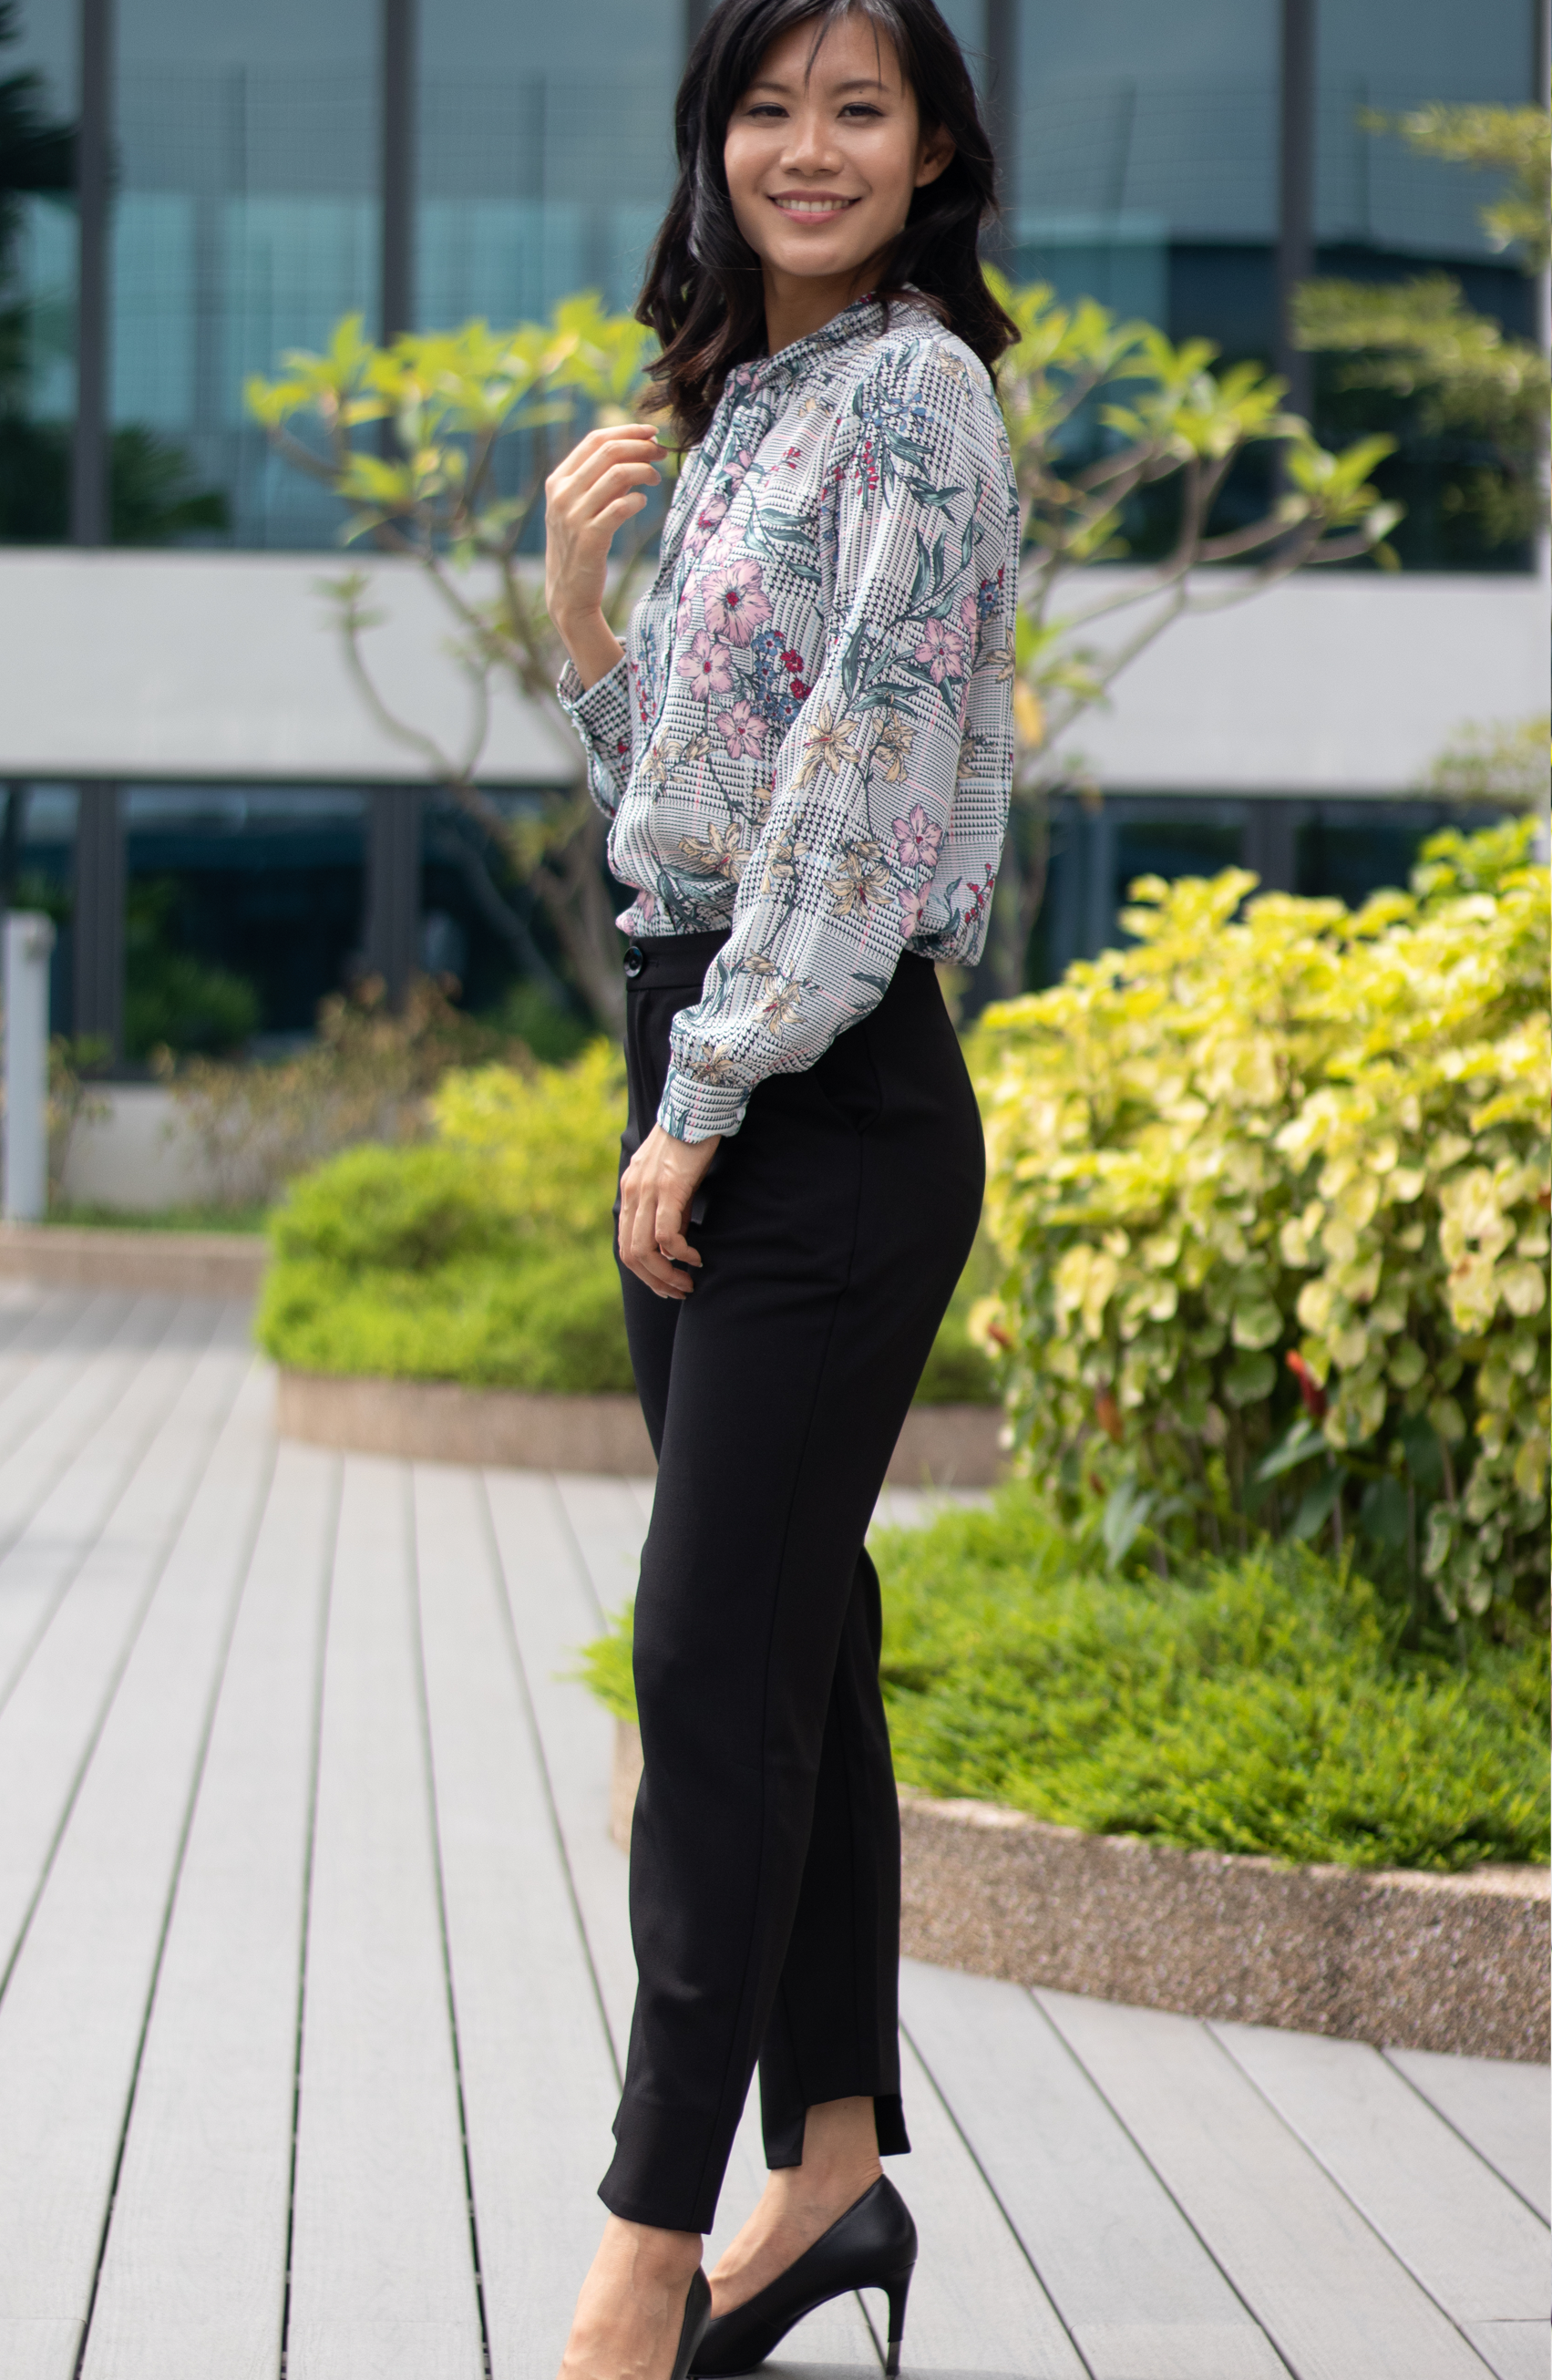 Soft Comfy Ditsy Floral Sketch Tie-Neck Cuffed Work Shirt Blouse